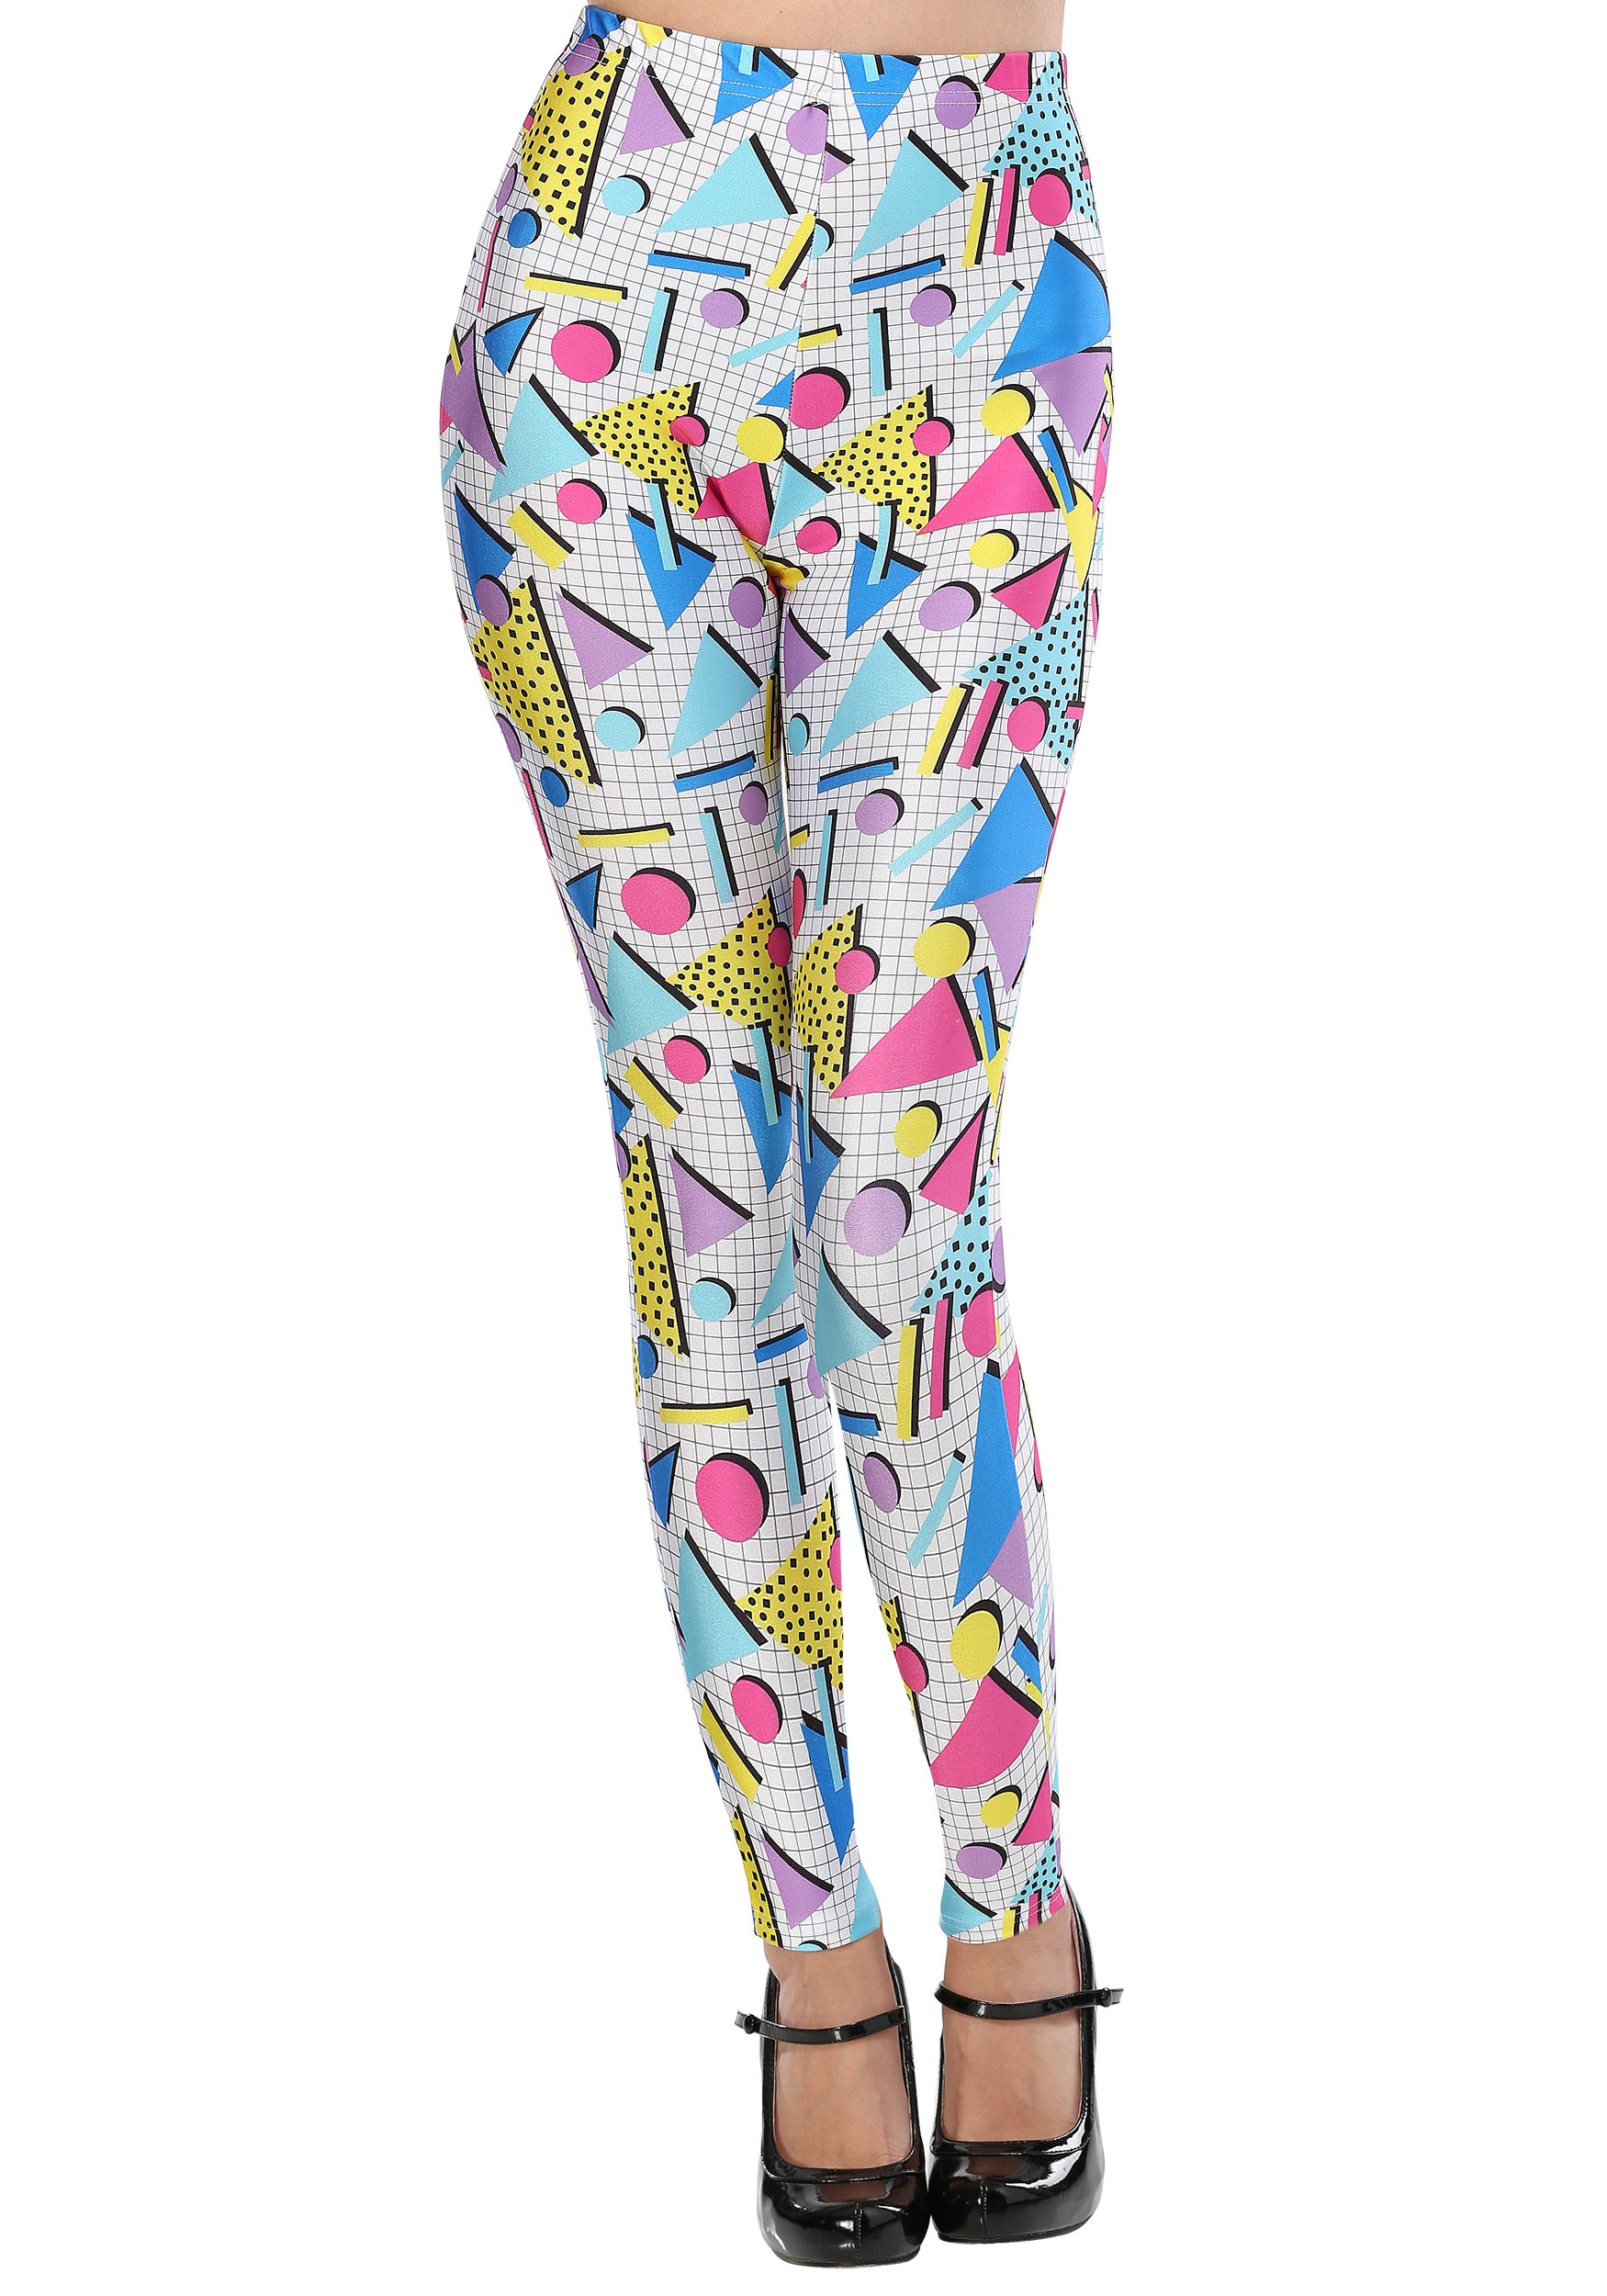 https://images.halloweencostumes.ca/products/43947/1-1/adult-80s-party-girl-leggings.jpg